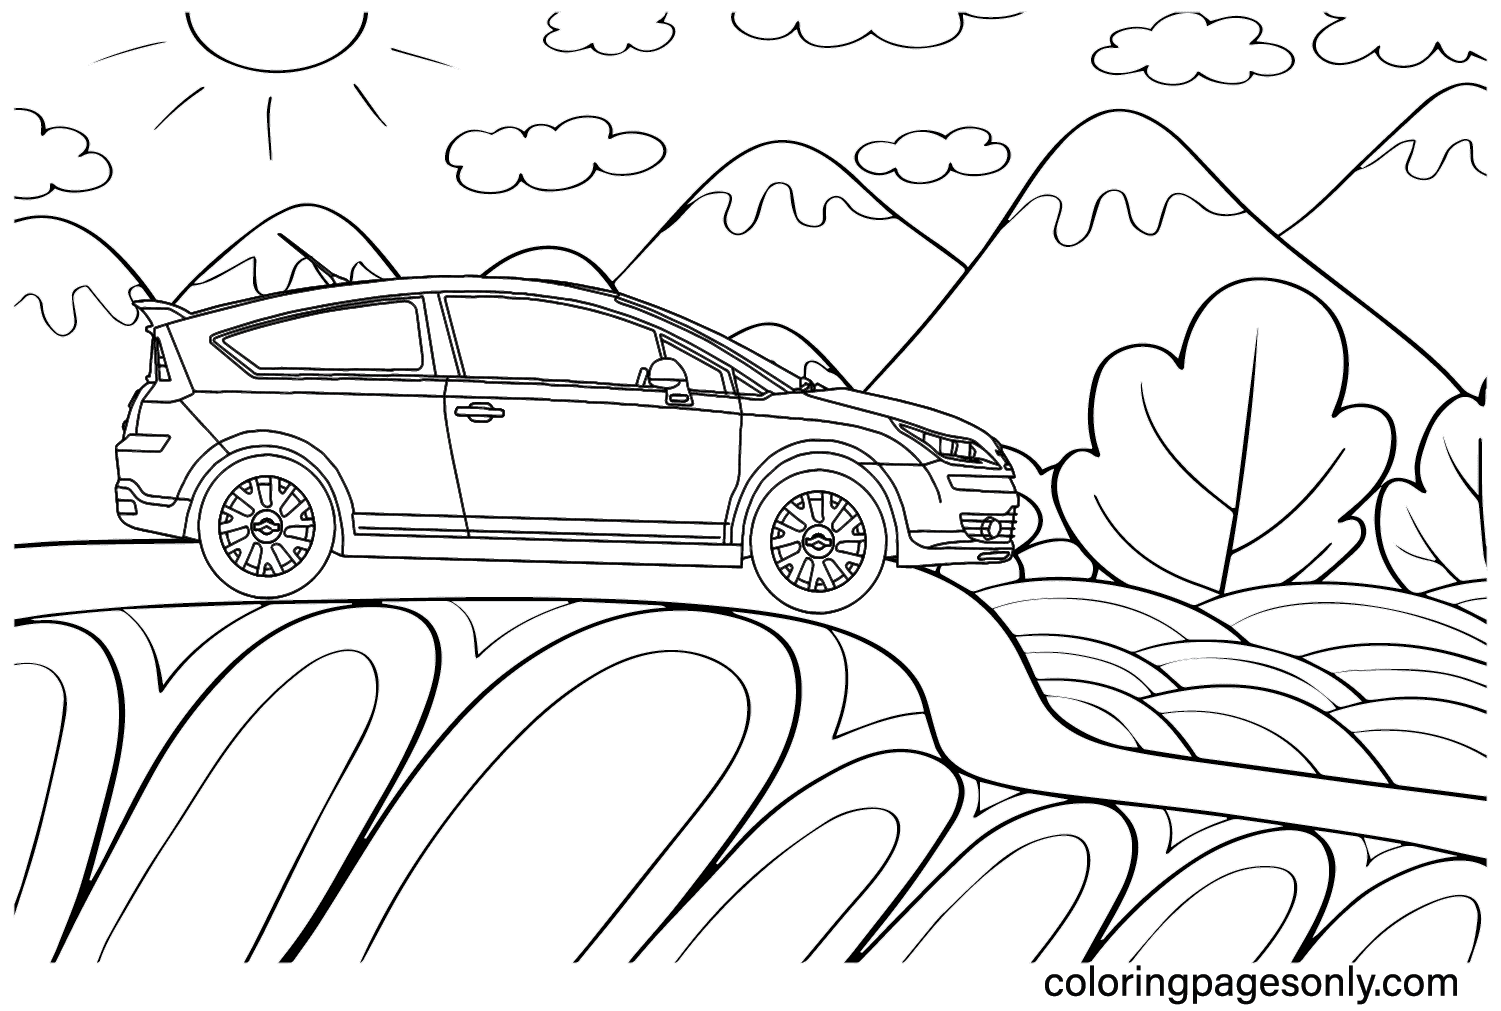 Citroën Car Coloring Page from Citroën